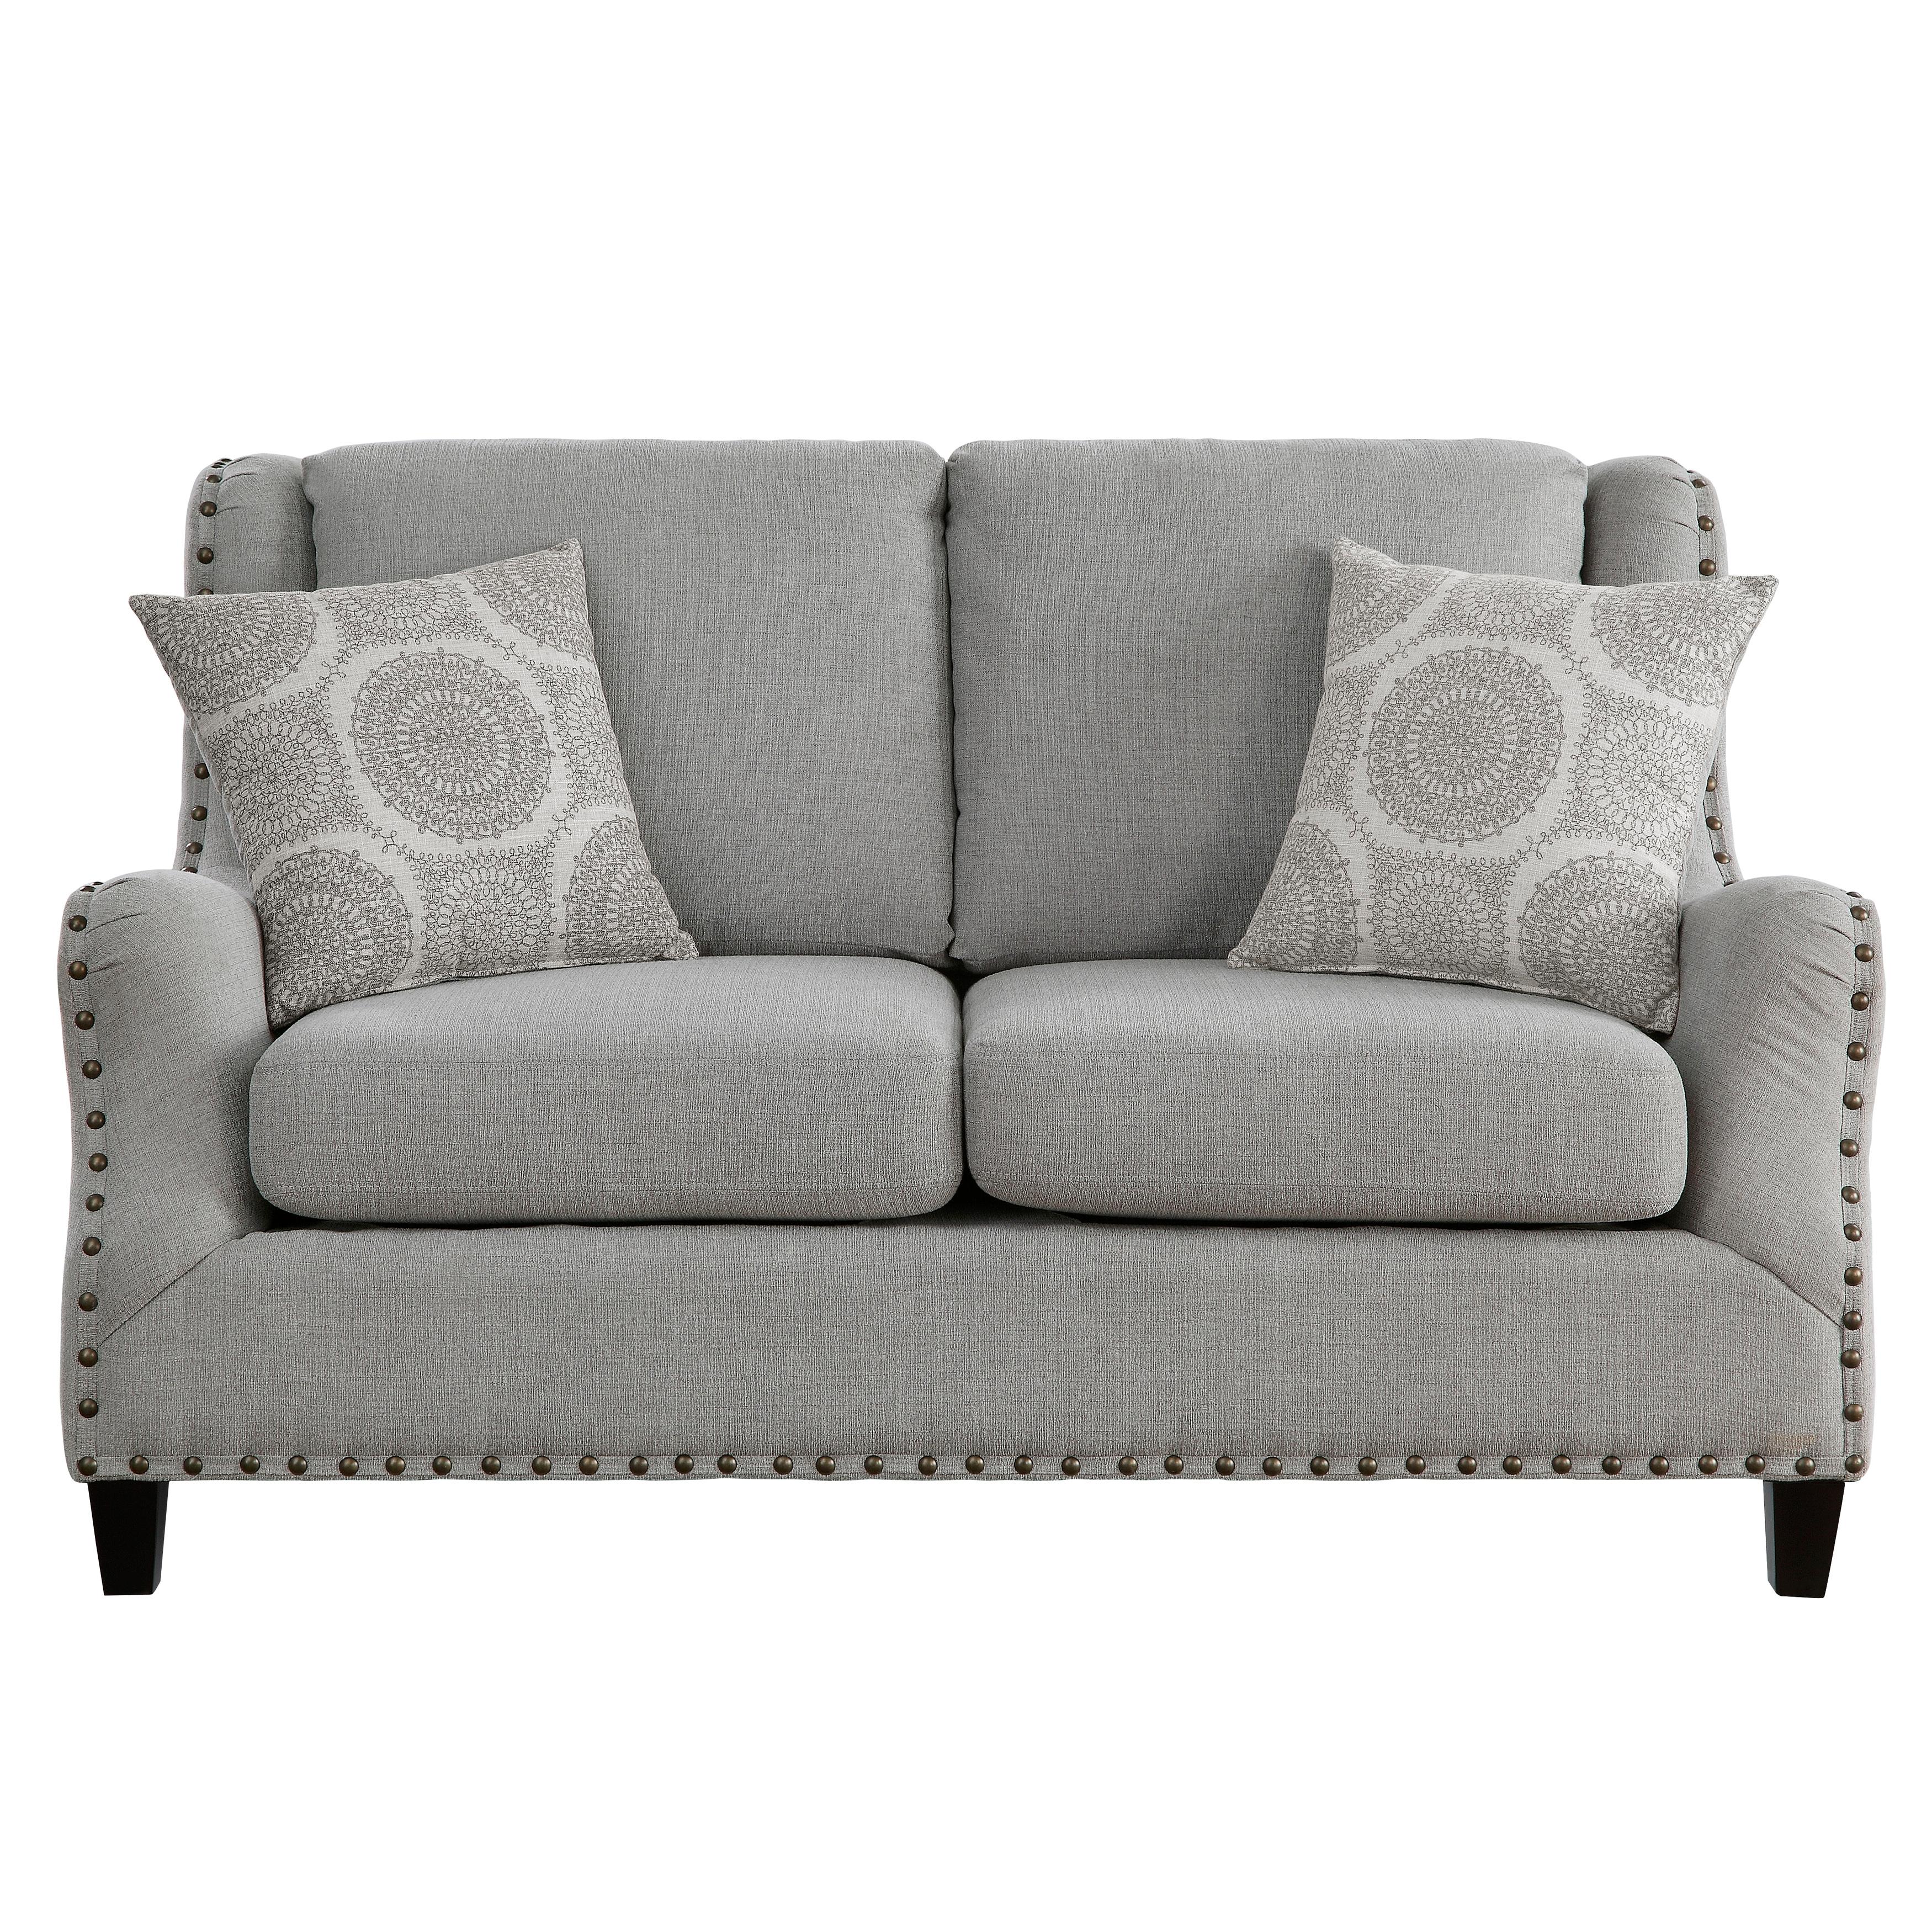 Traditional Loveseat 9339GY-2 Halton 9339GY-2 in Gray 